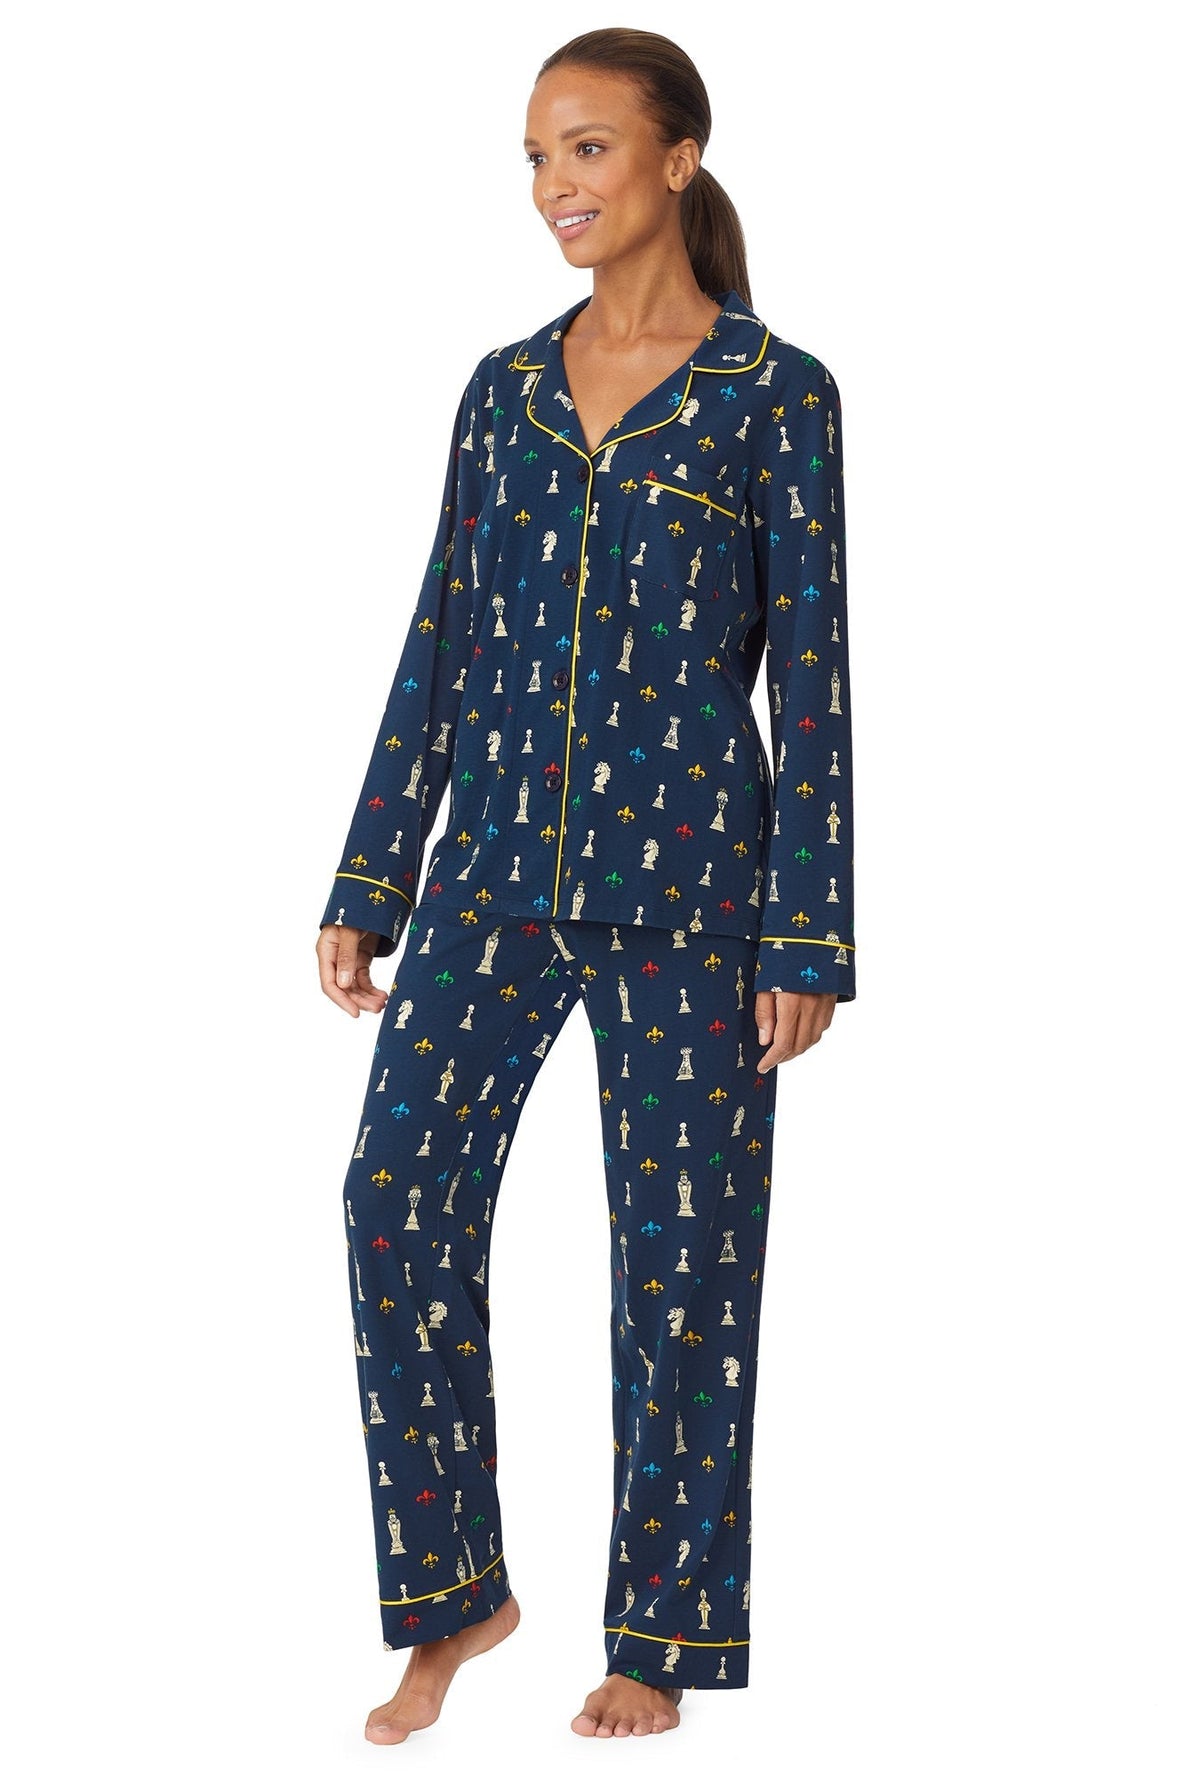 A girl wearing a navy blue long sleeve stretch jersey pj set with checkmate pattern.